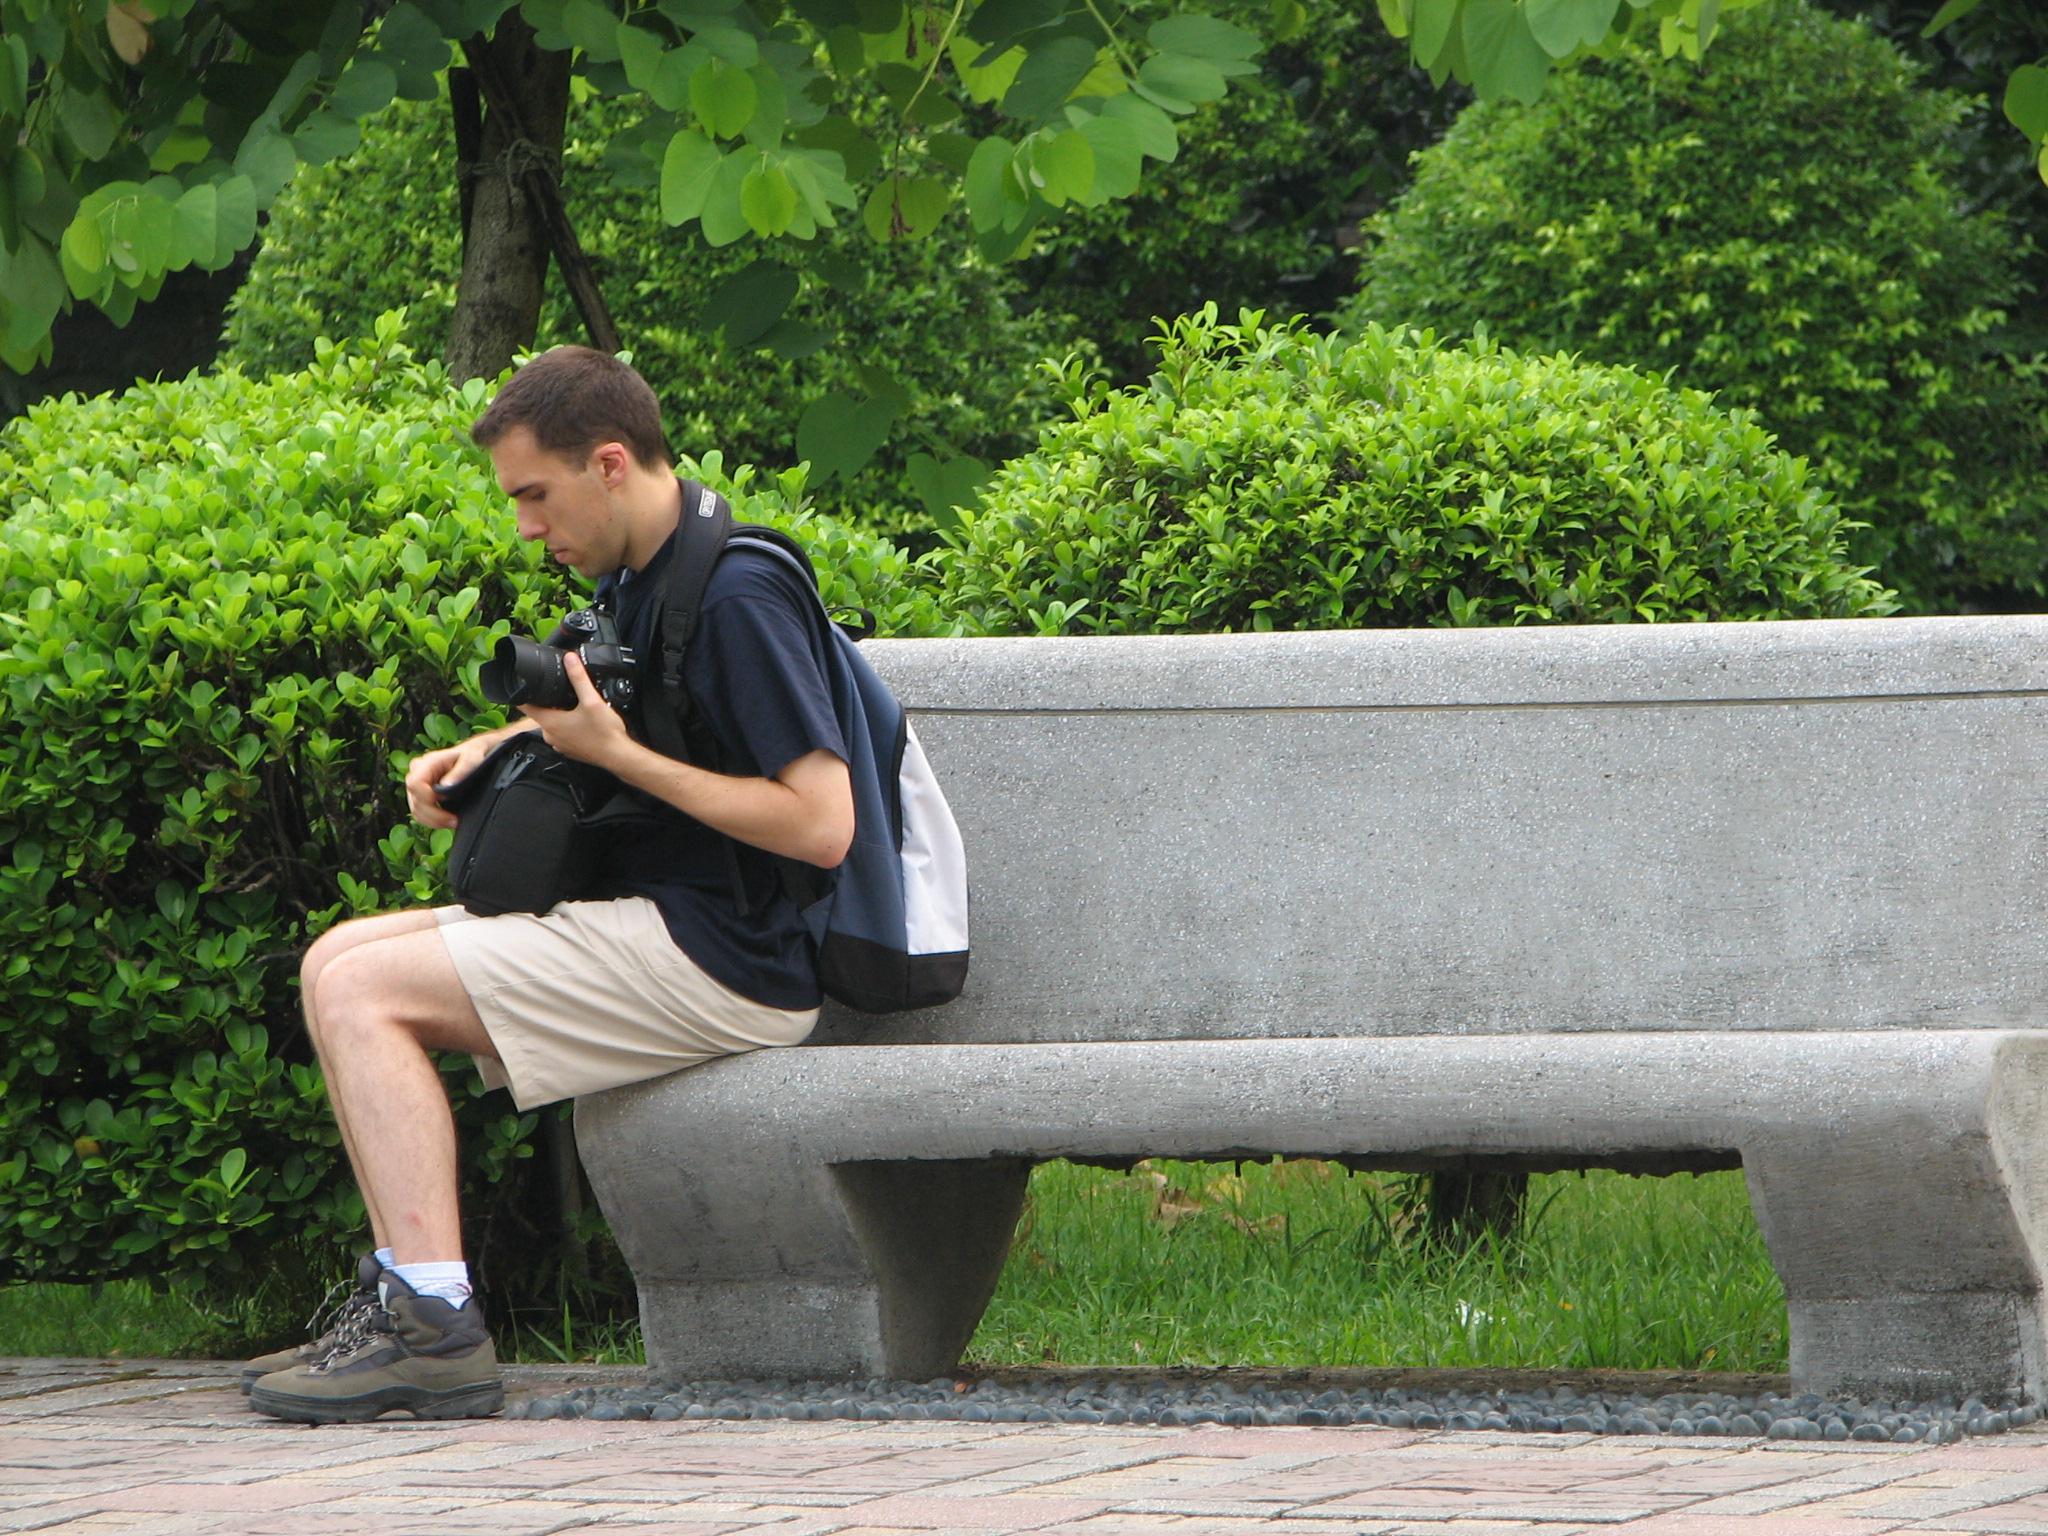 A picture of Guillaume Paumier sitting on a bench, changing a lens on a camera, on a background of green plants.